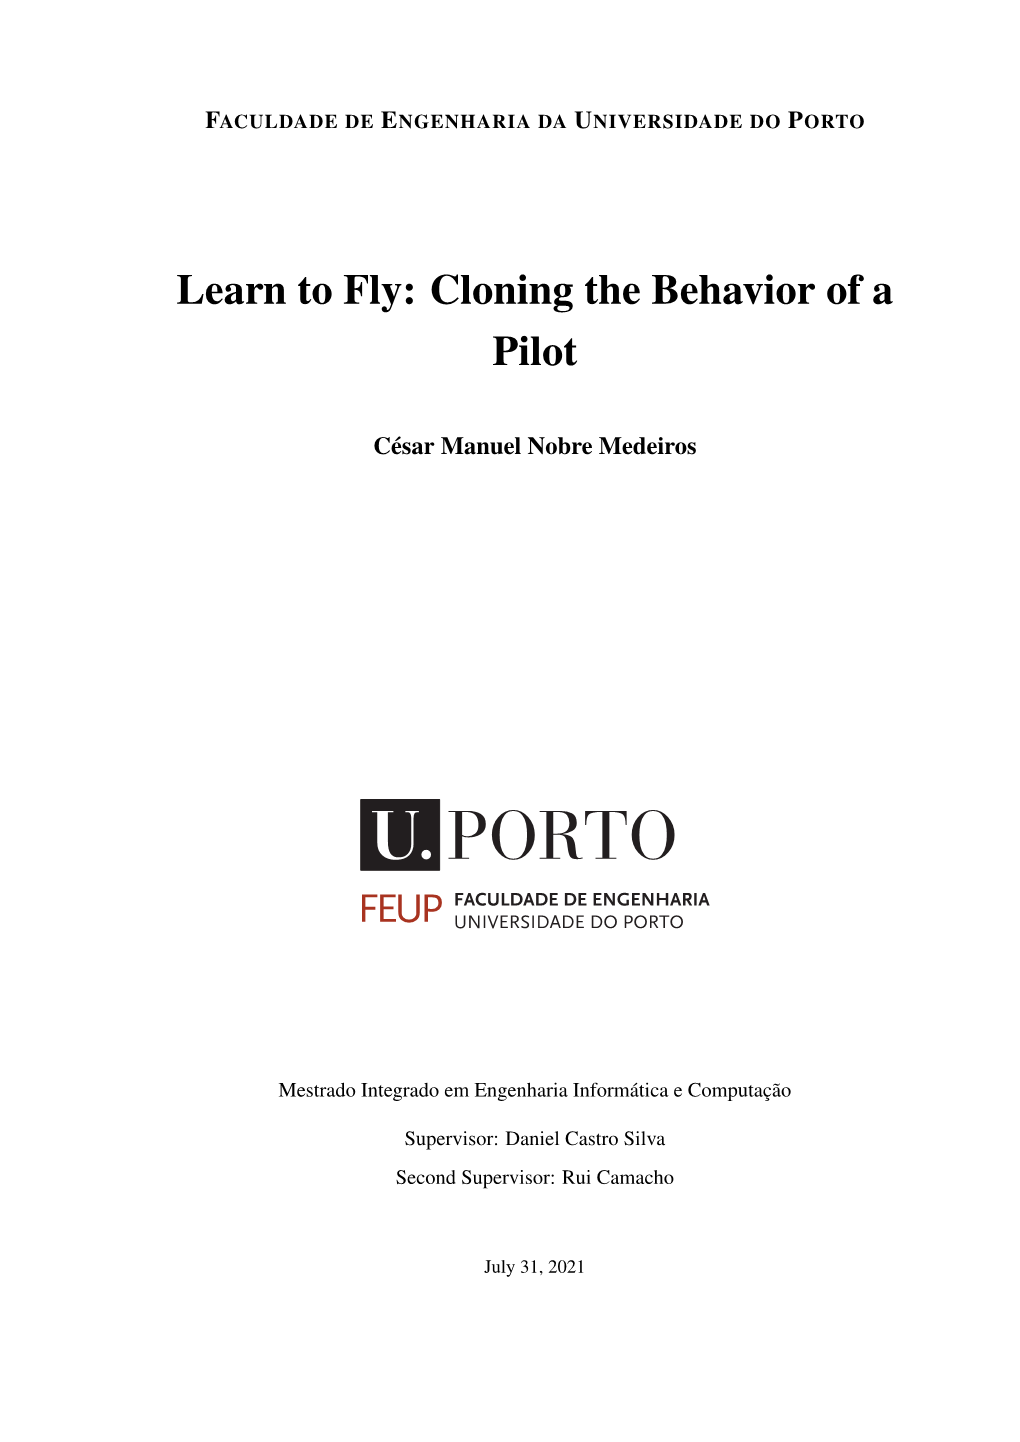 Learn to Fly: Cloning the Behavior of a Pilot